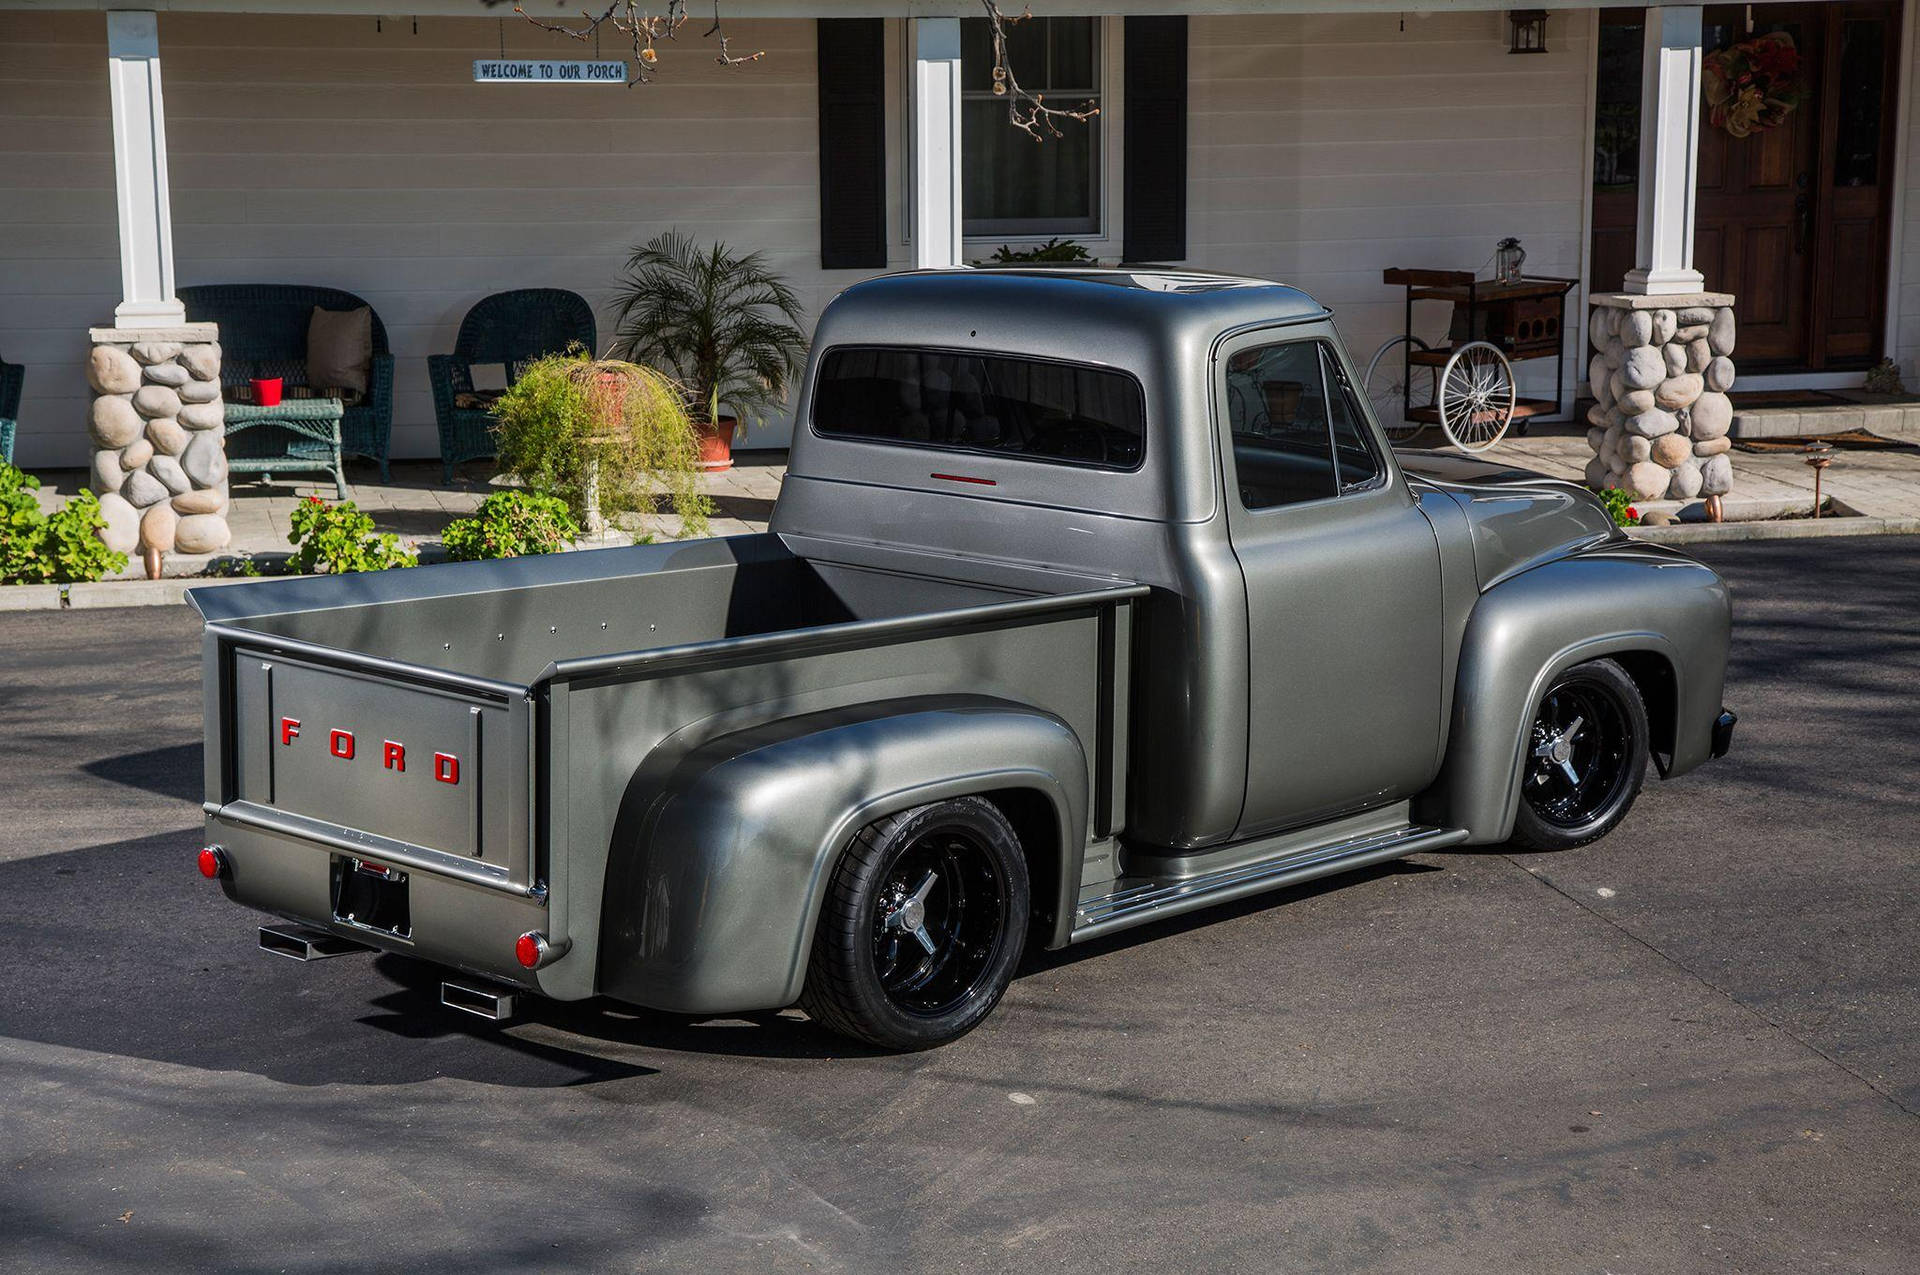 Vintage Beauty - Stunning Grey Old Ford Truck